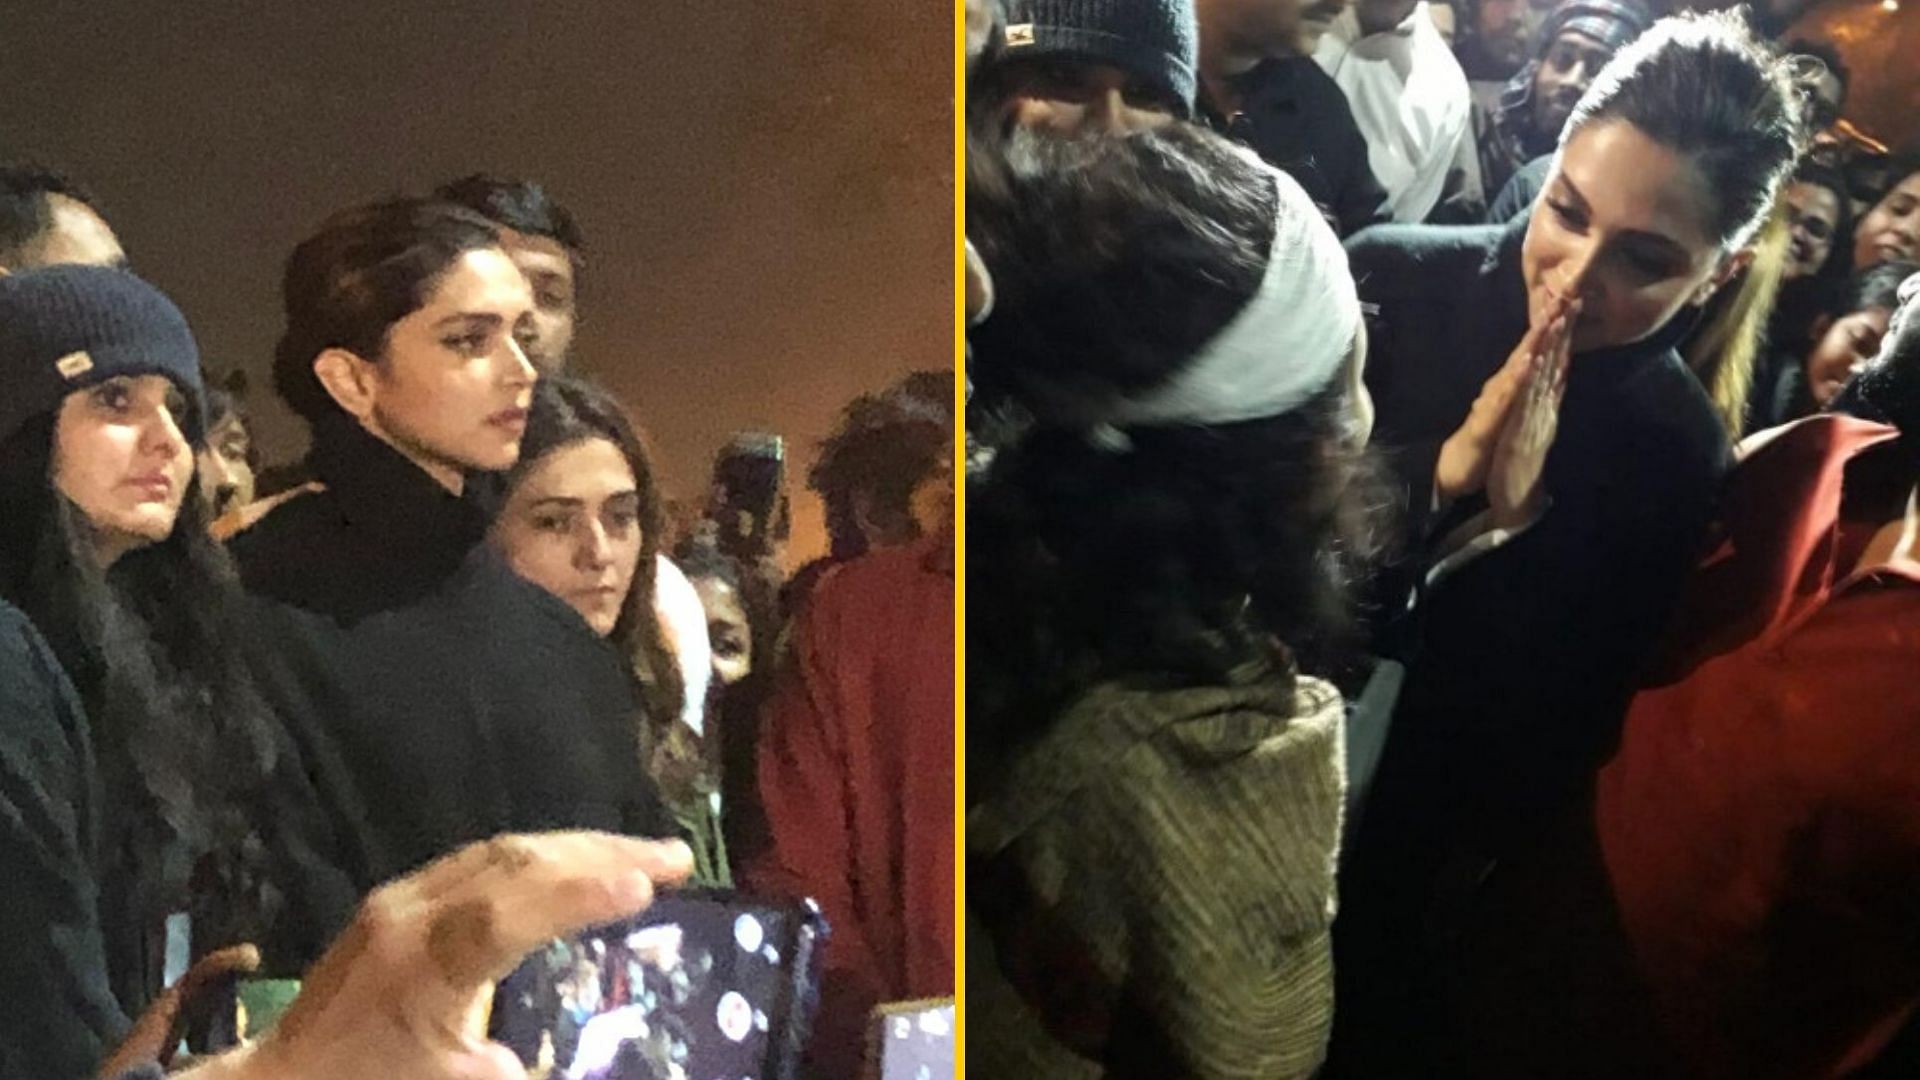 Bollywood actor Deepika Padukone on Tuesday, 7 January joined a protest rally against the attack that took place on students and teachers of Jawaharlal Nehru University (JNU).